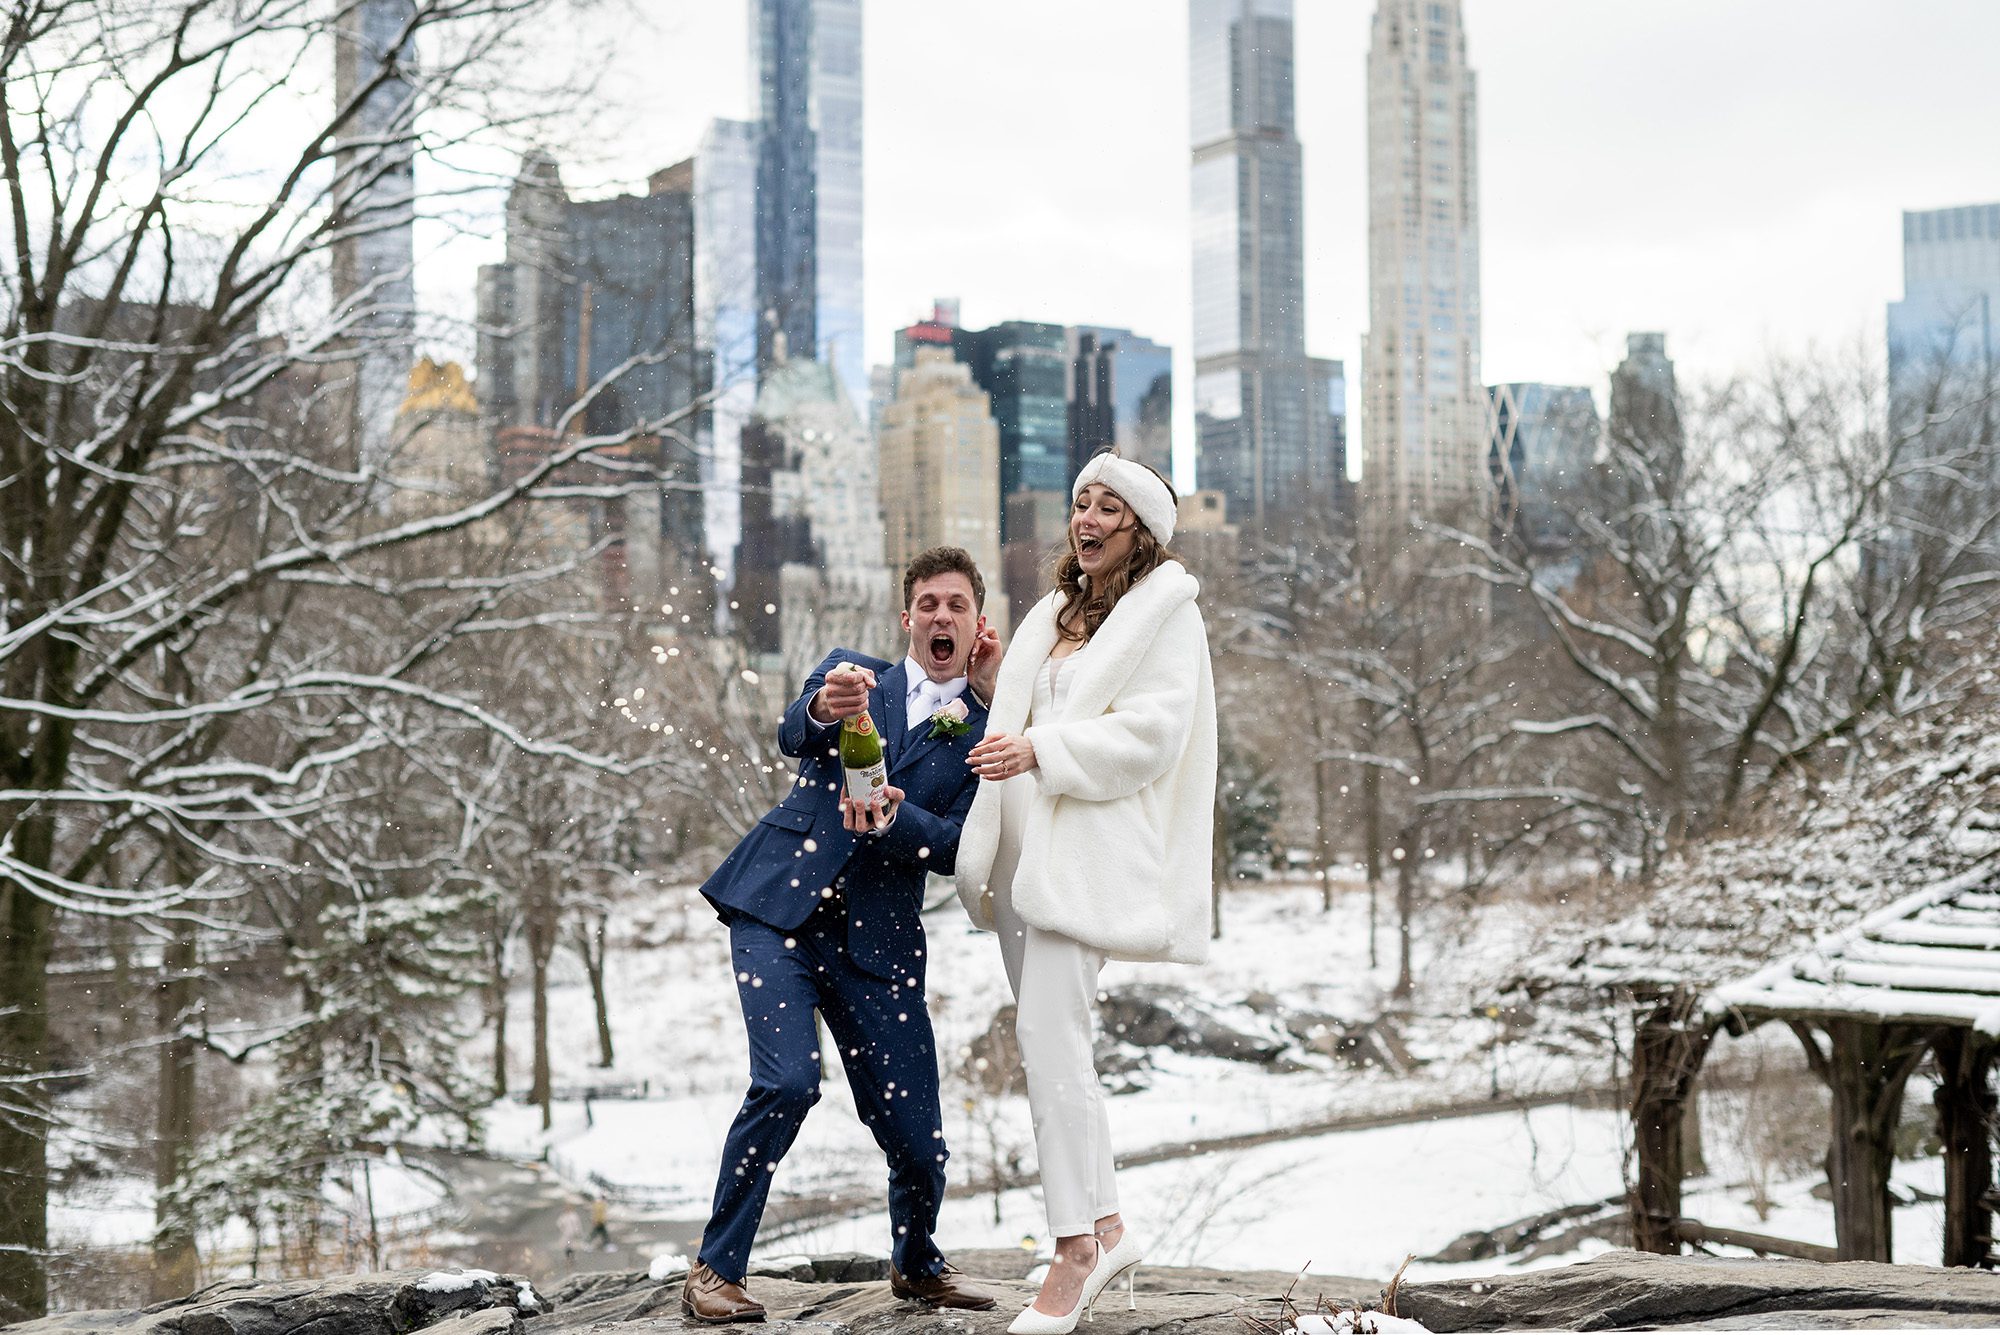 Wedding couple popping a bottle of champagne after their NYC Elopement overlooking the NYC skyline in winter time.